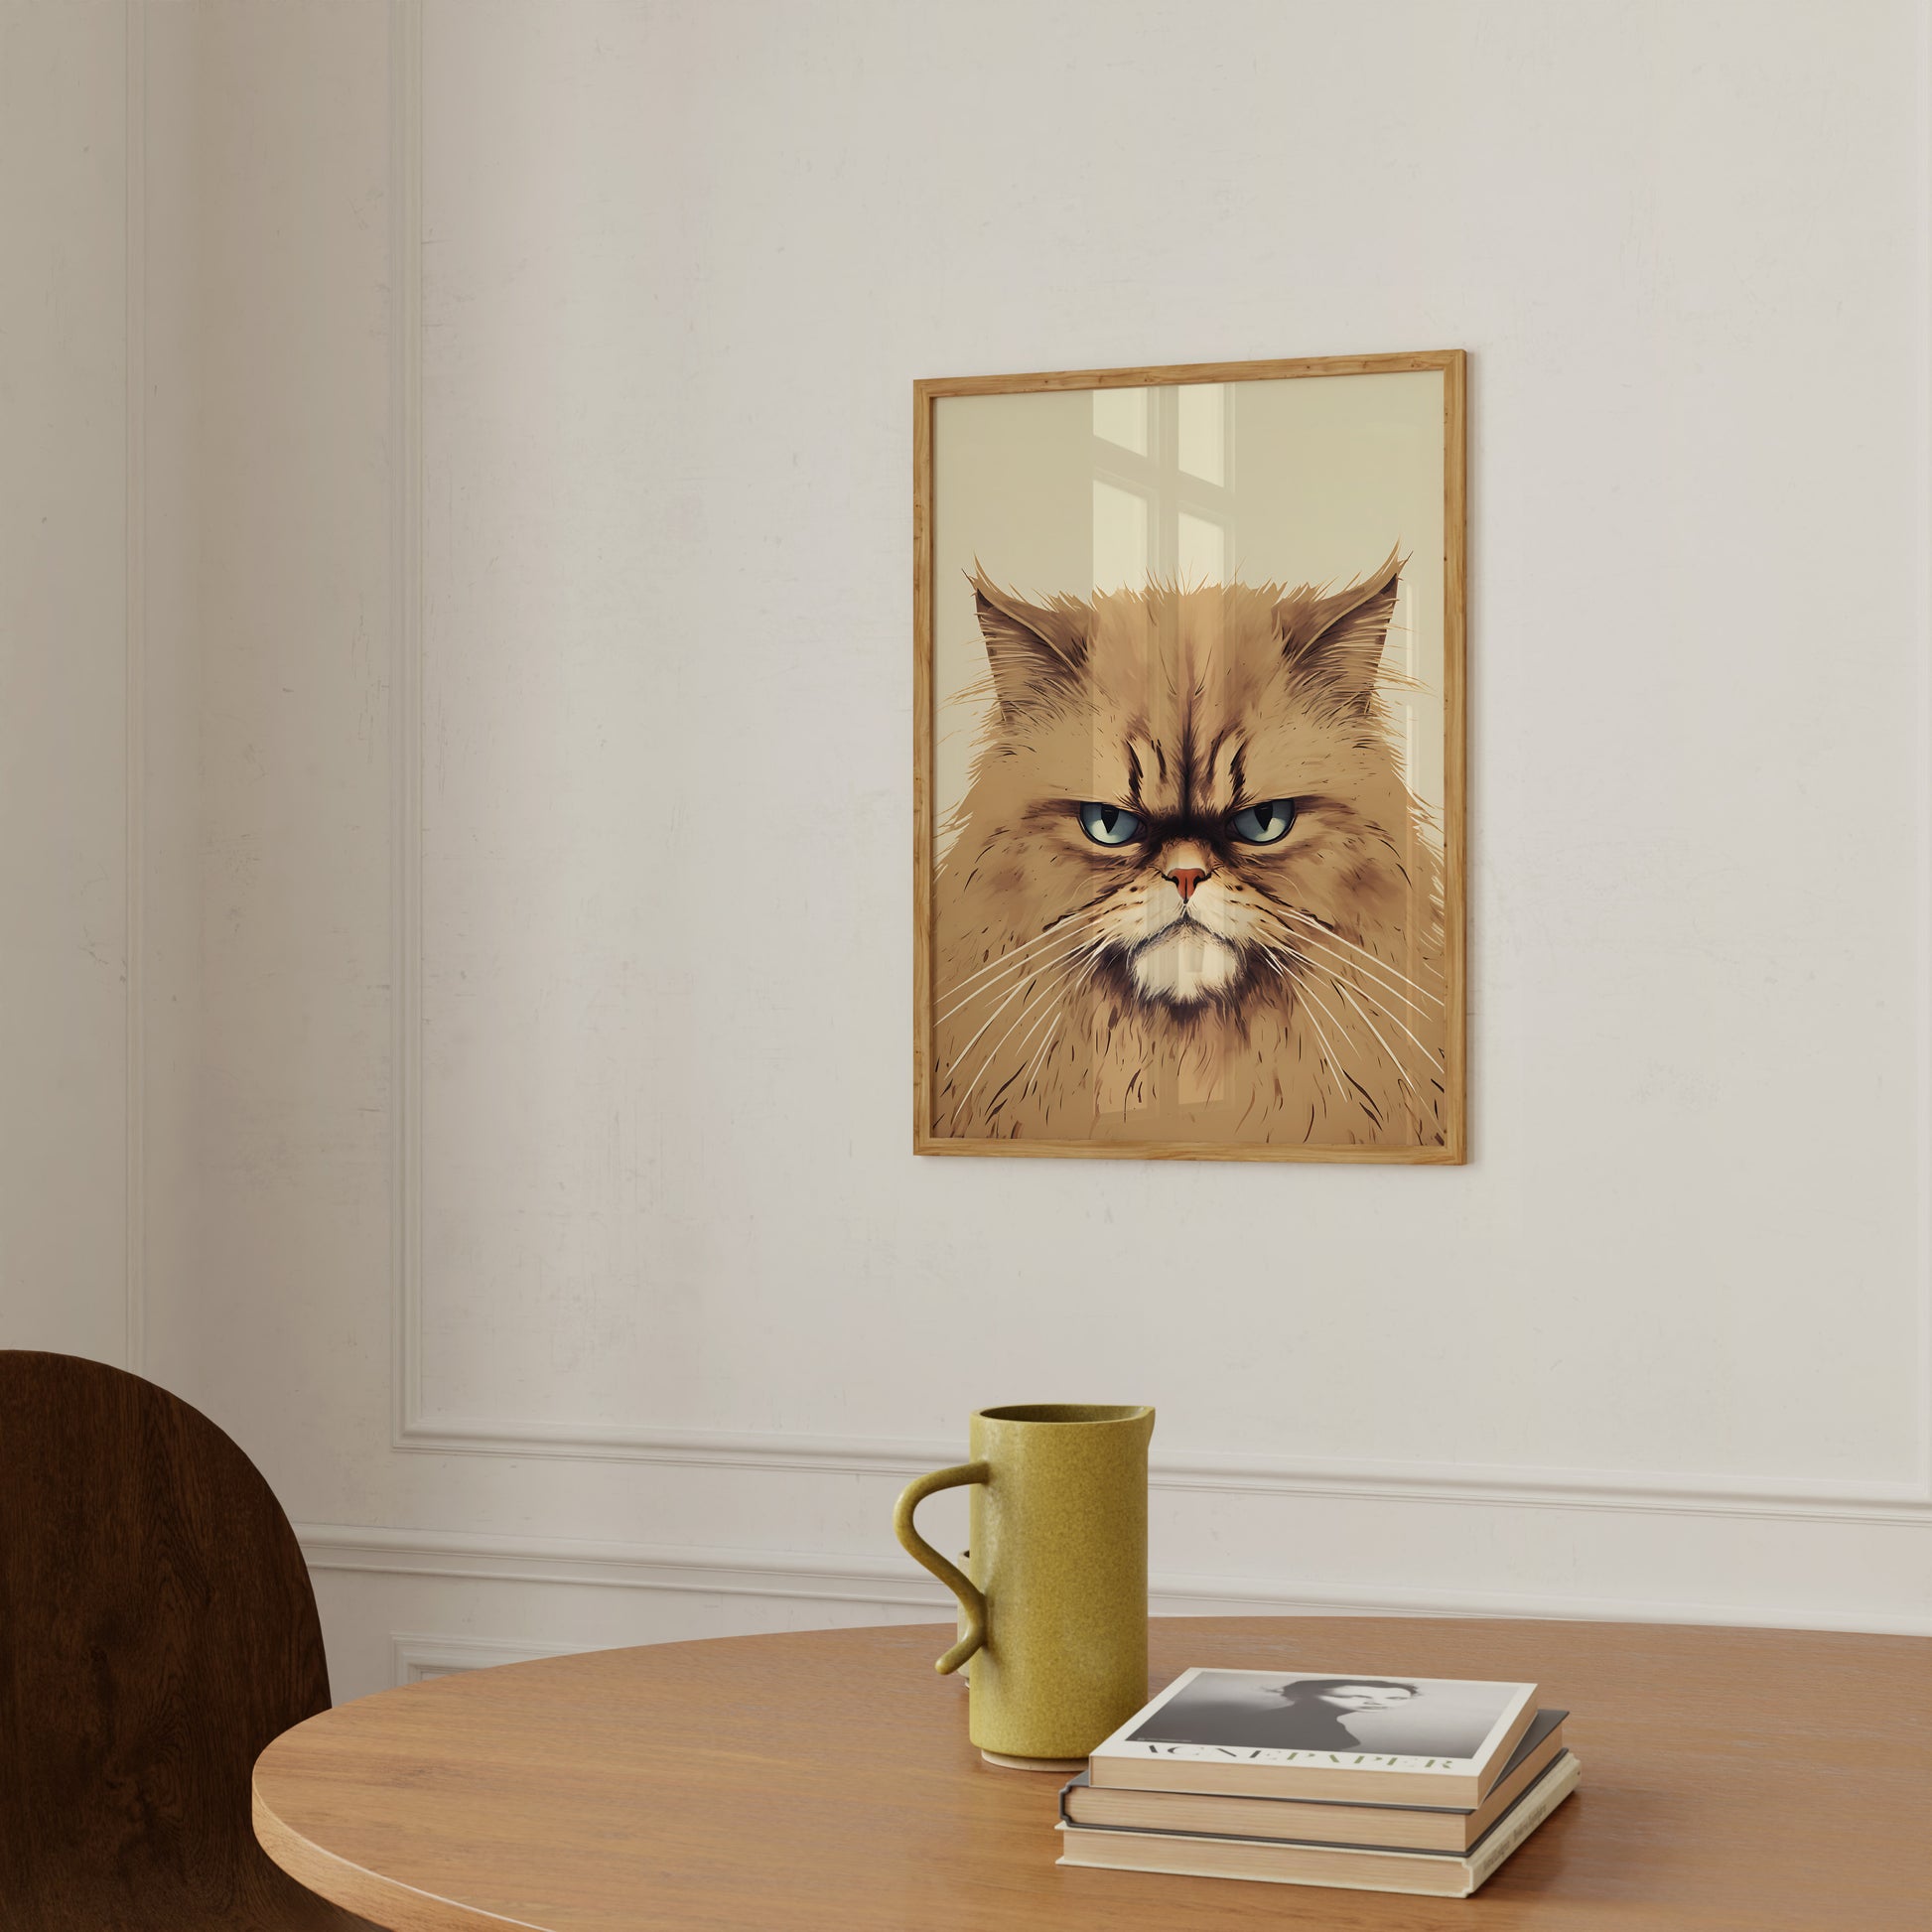 A framed picture of an angry-looking cat on a wall above a table with a mug and books.